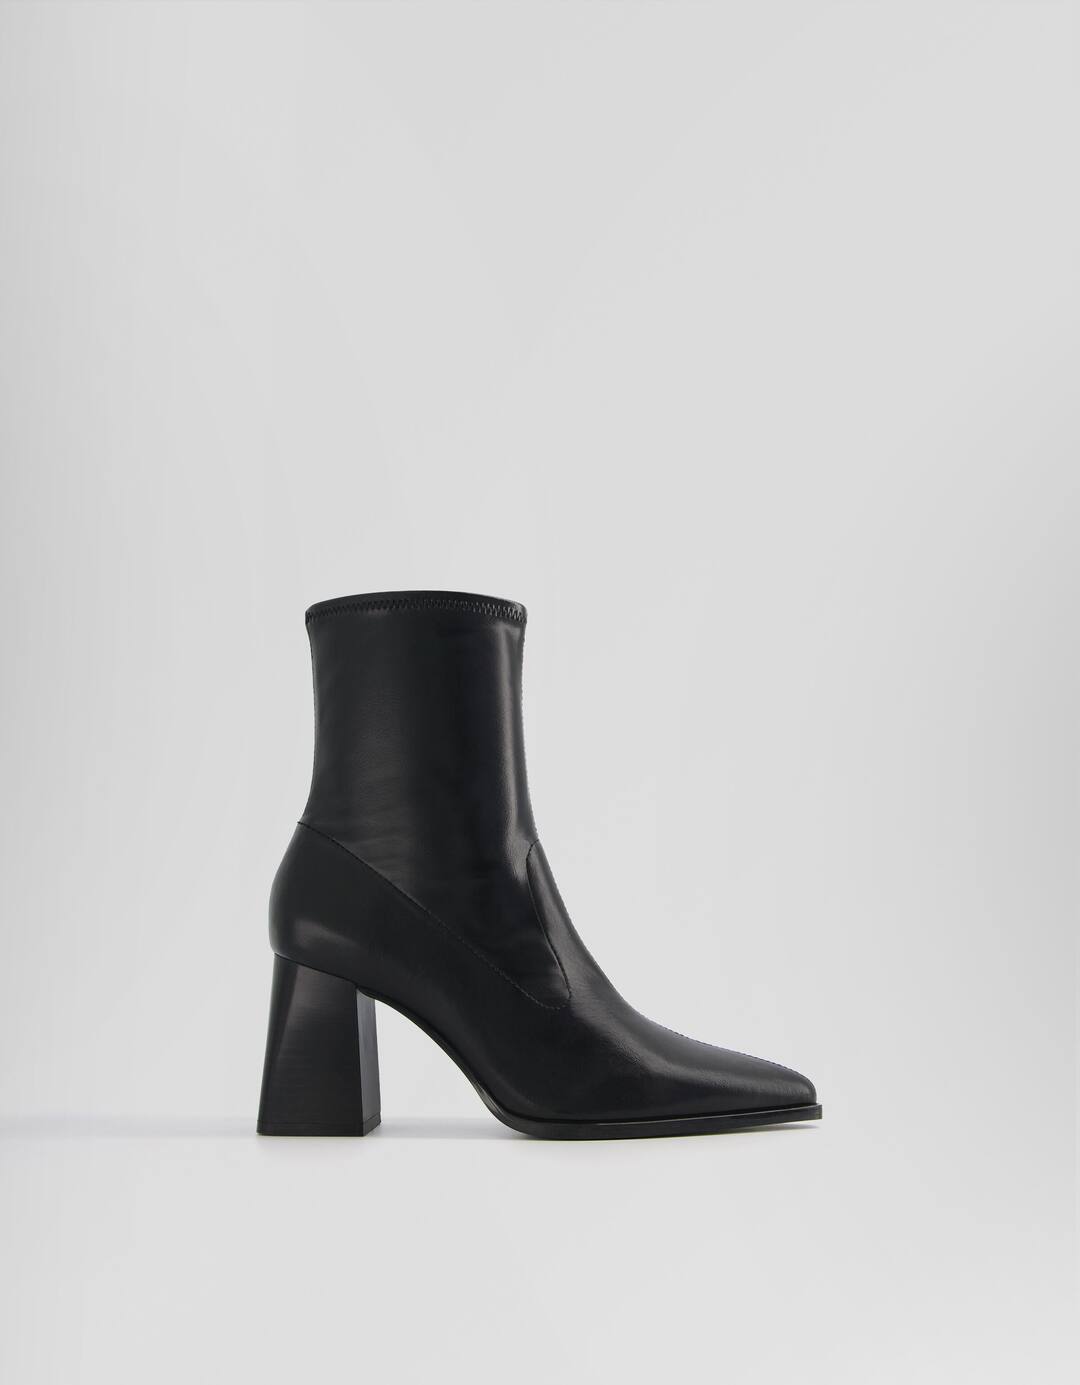 Fitted block-heel pointed-toe ankle boots